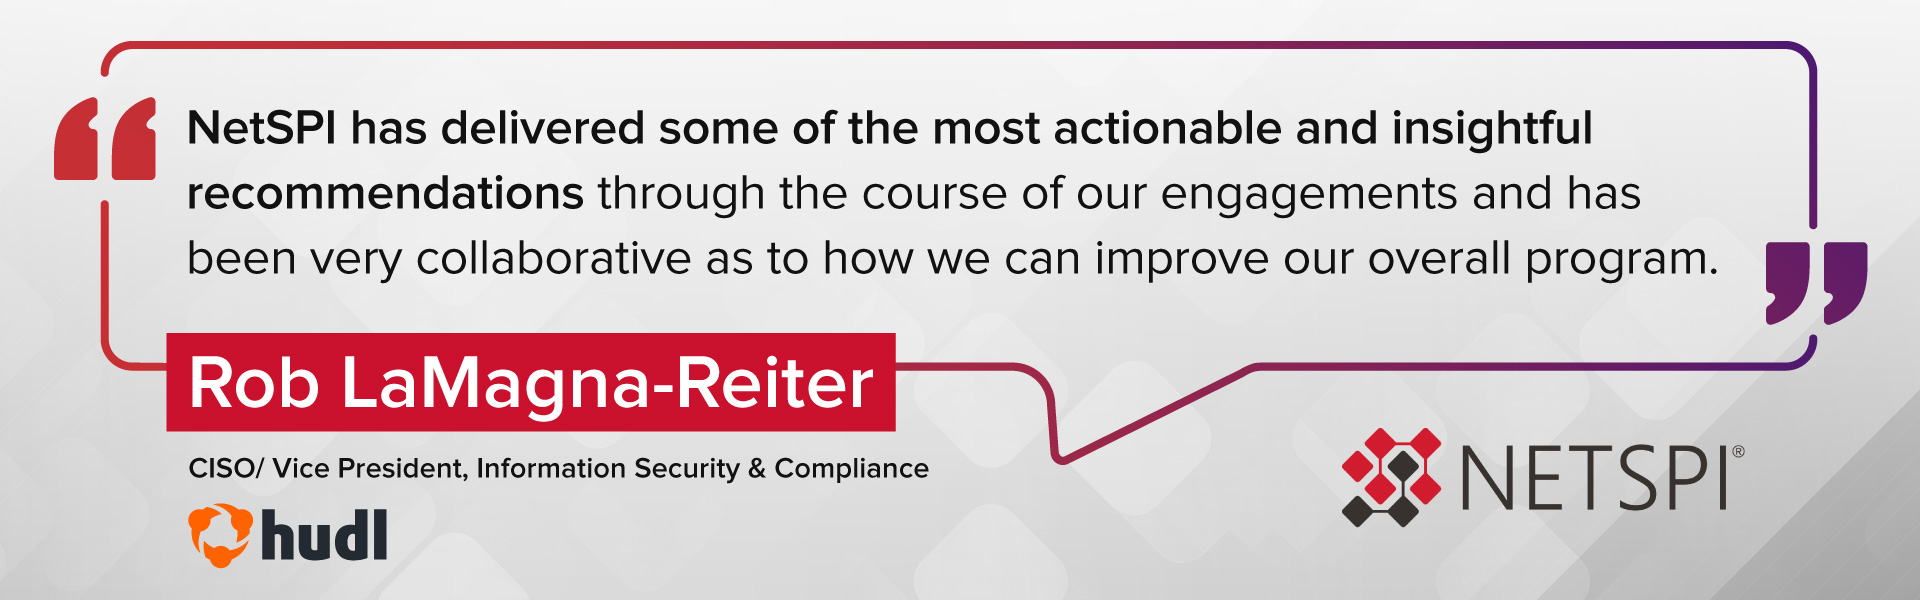 "NetSPI has delivered some of the most actionable and insightful recommendations through the course of our engagements and has been very collaborative as to how we can improve our overall program." – Rob LaMagna-Reiter, CISO/Vice President, Information Security & Compliance at Hudl